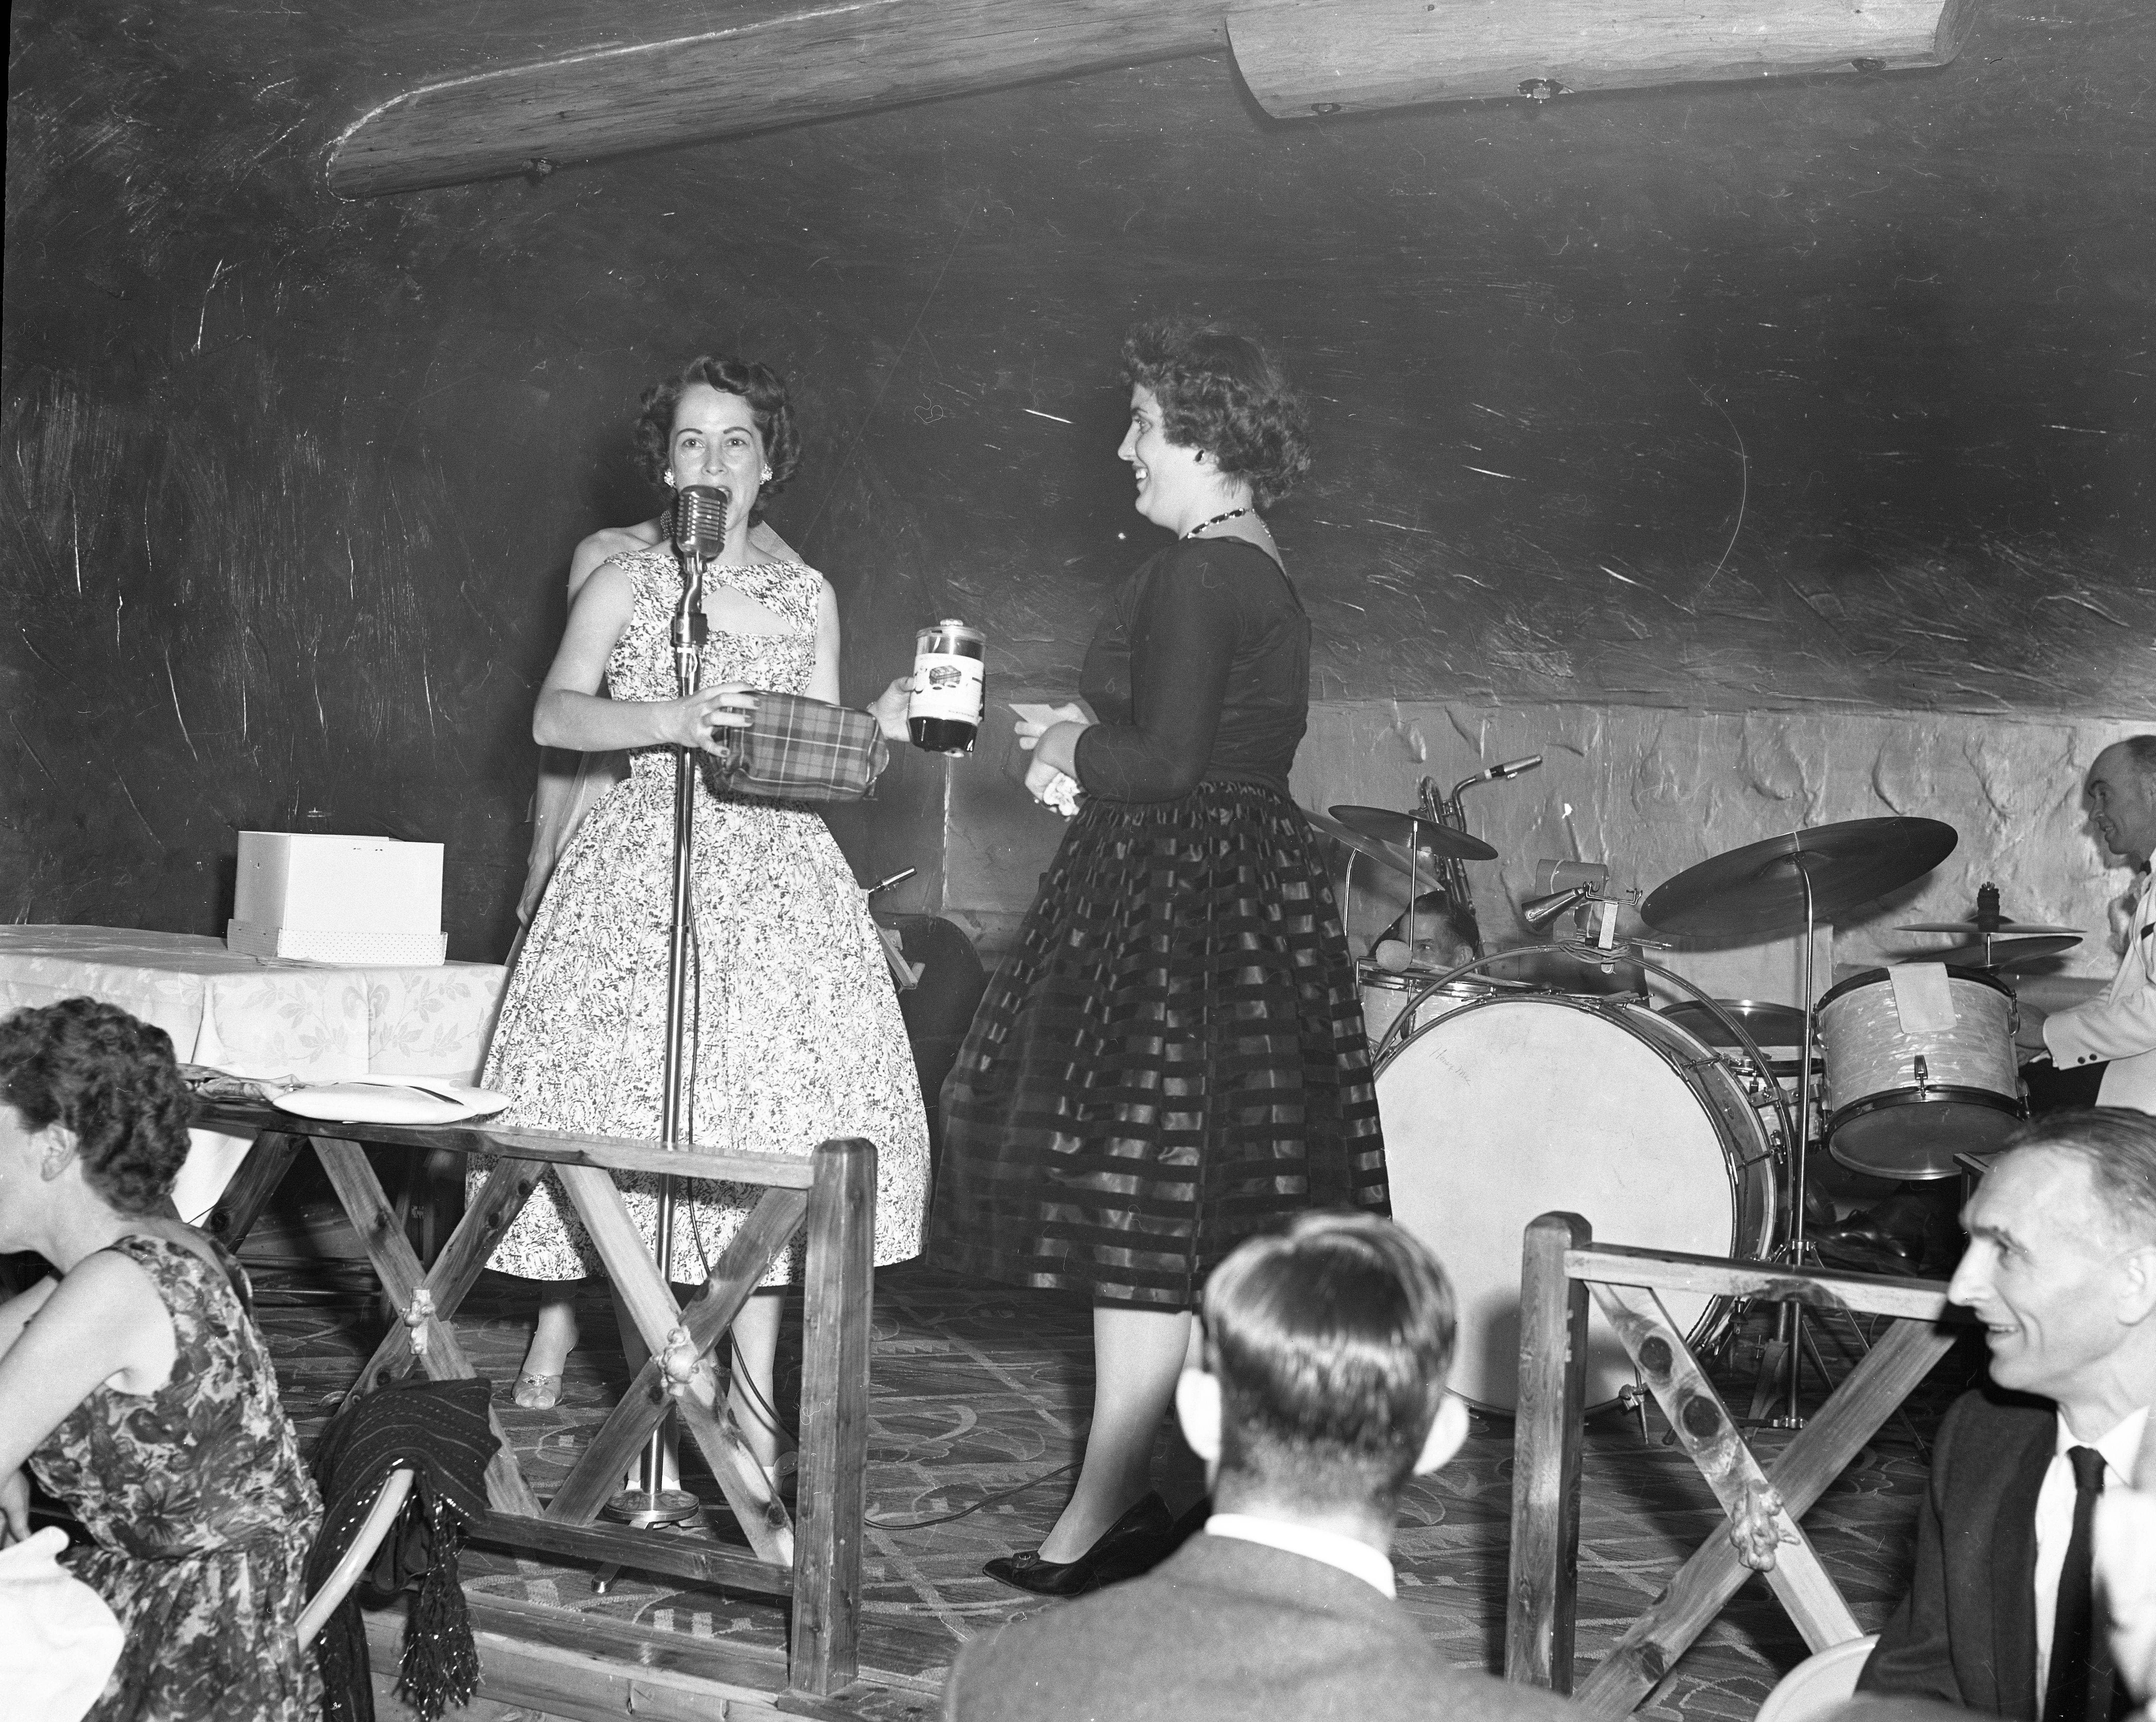 Women presenting gifts on stage at the Convair dance.